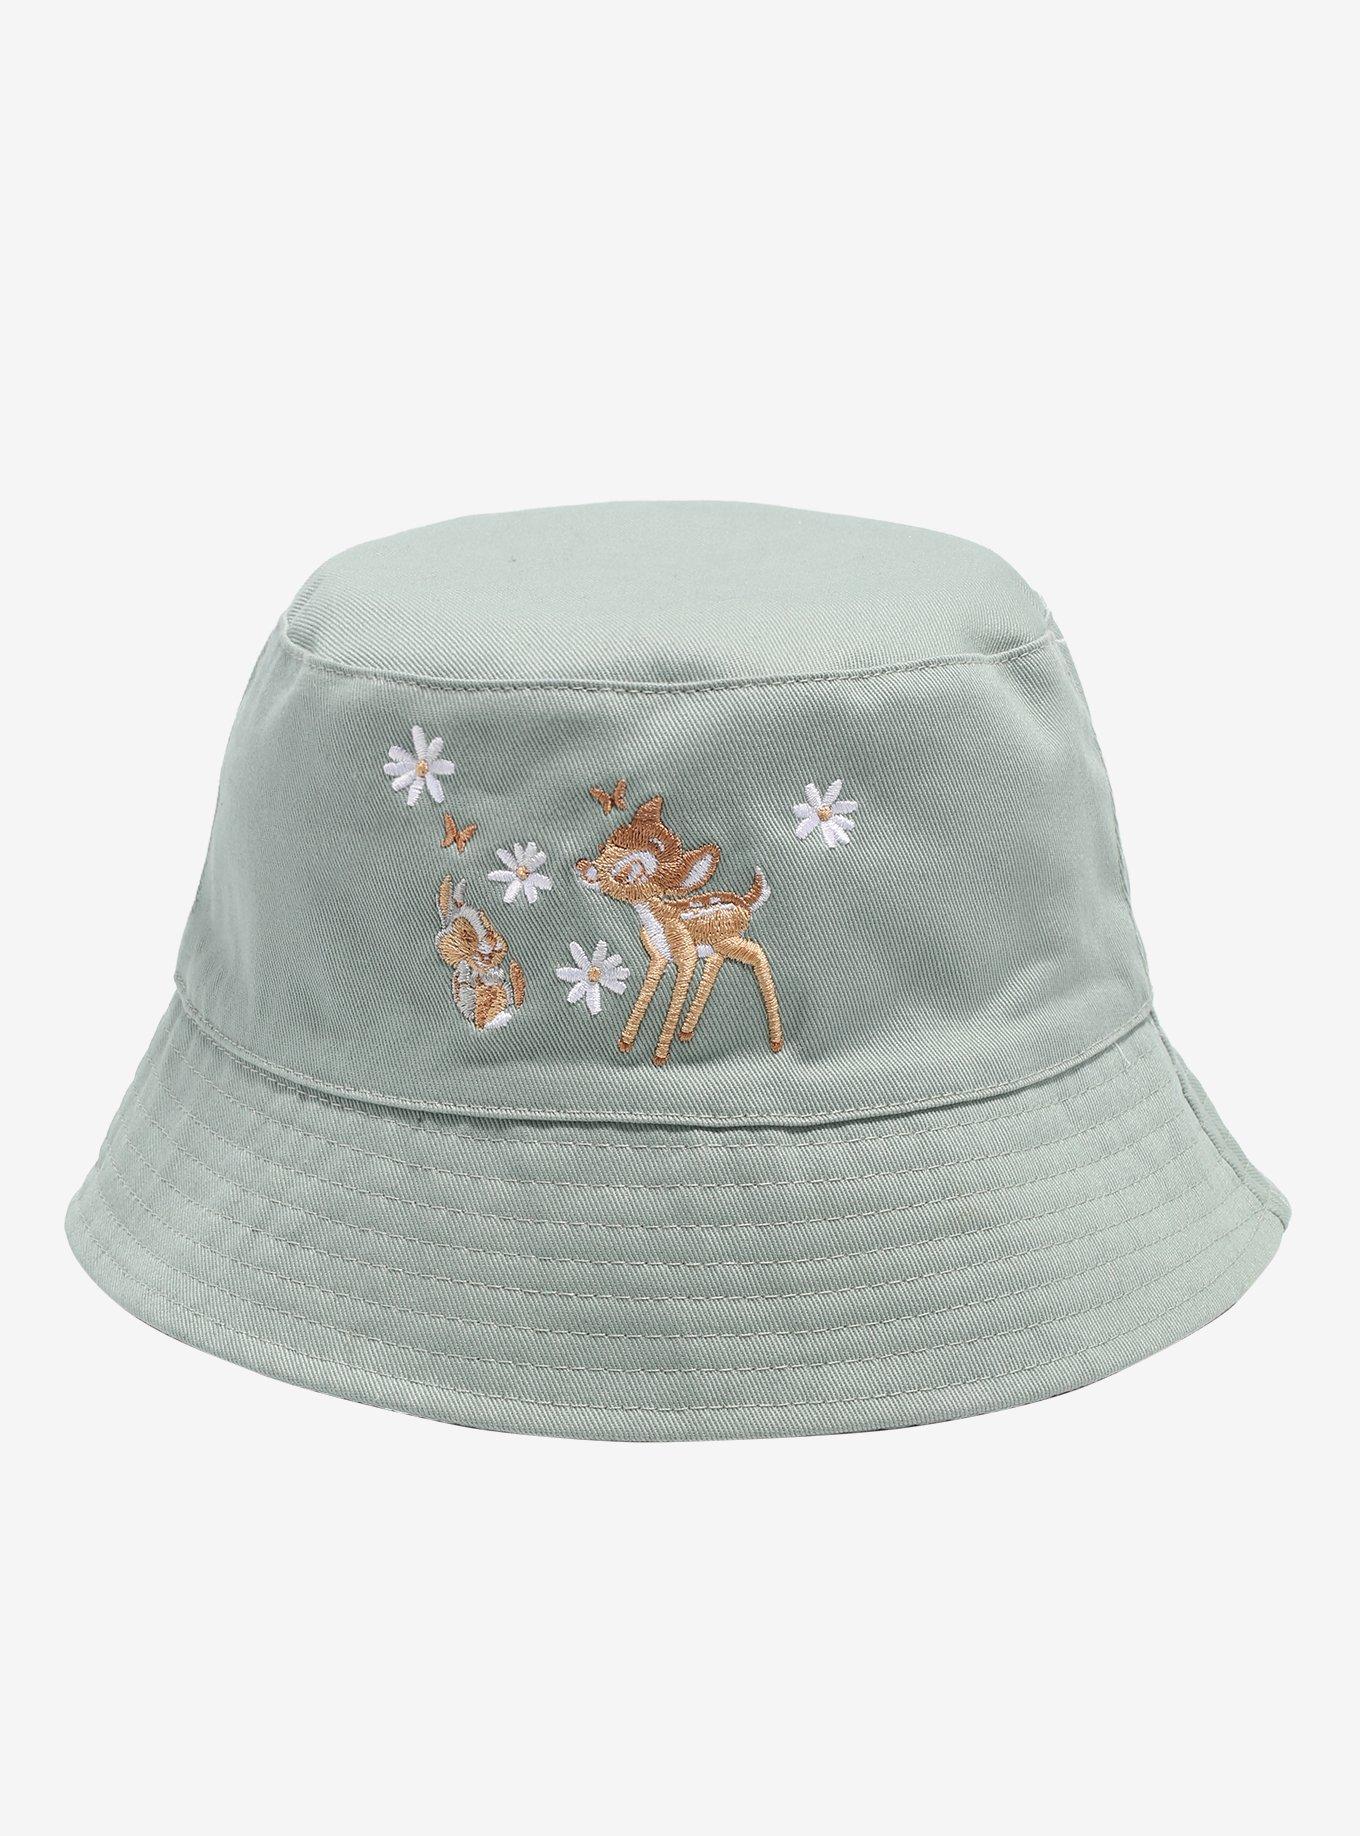 Emerson and Friends - Reversible Bucket Hat - Beach Day and Coral Stri